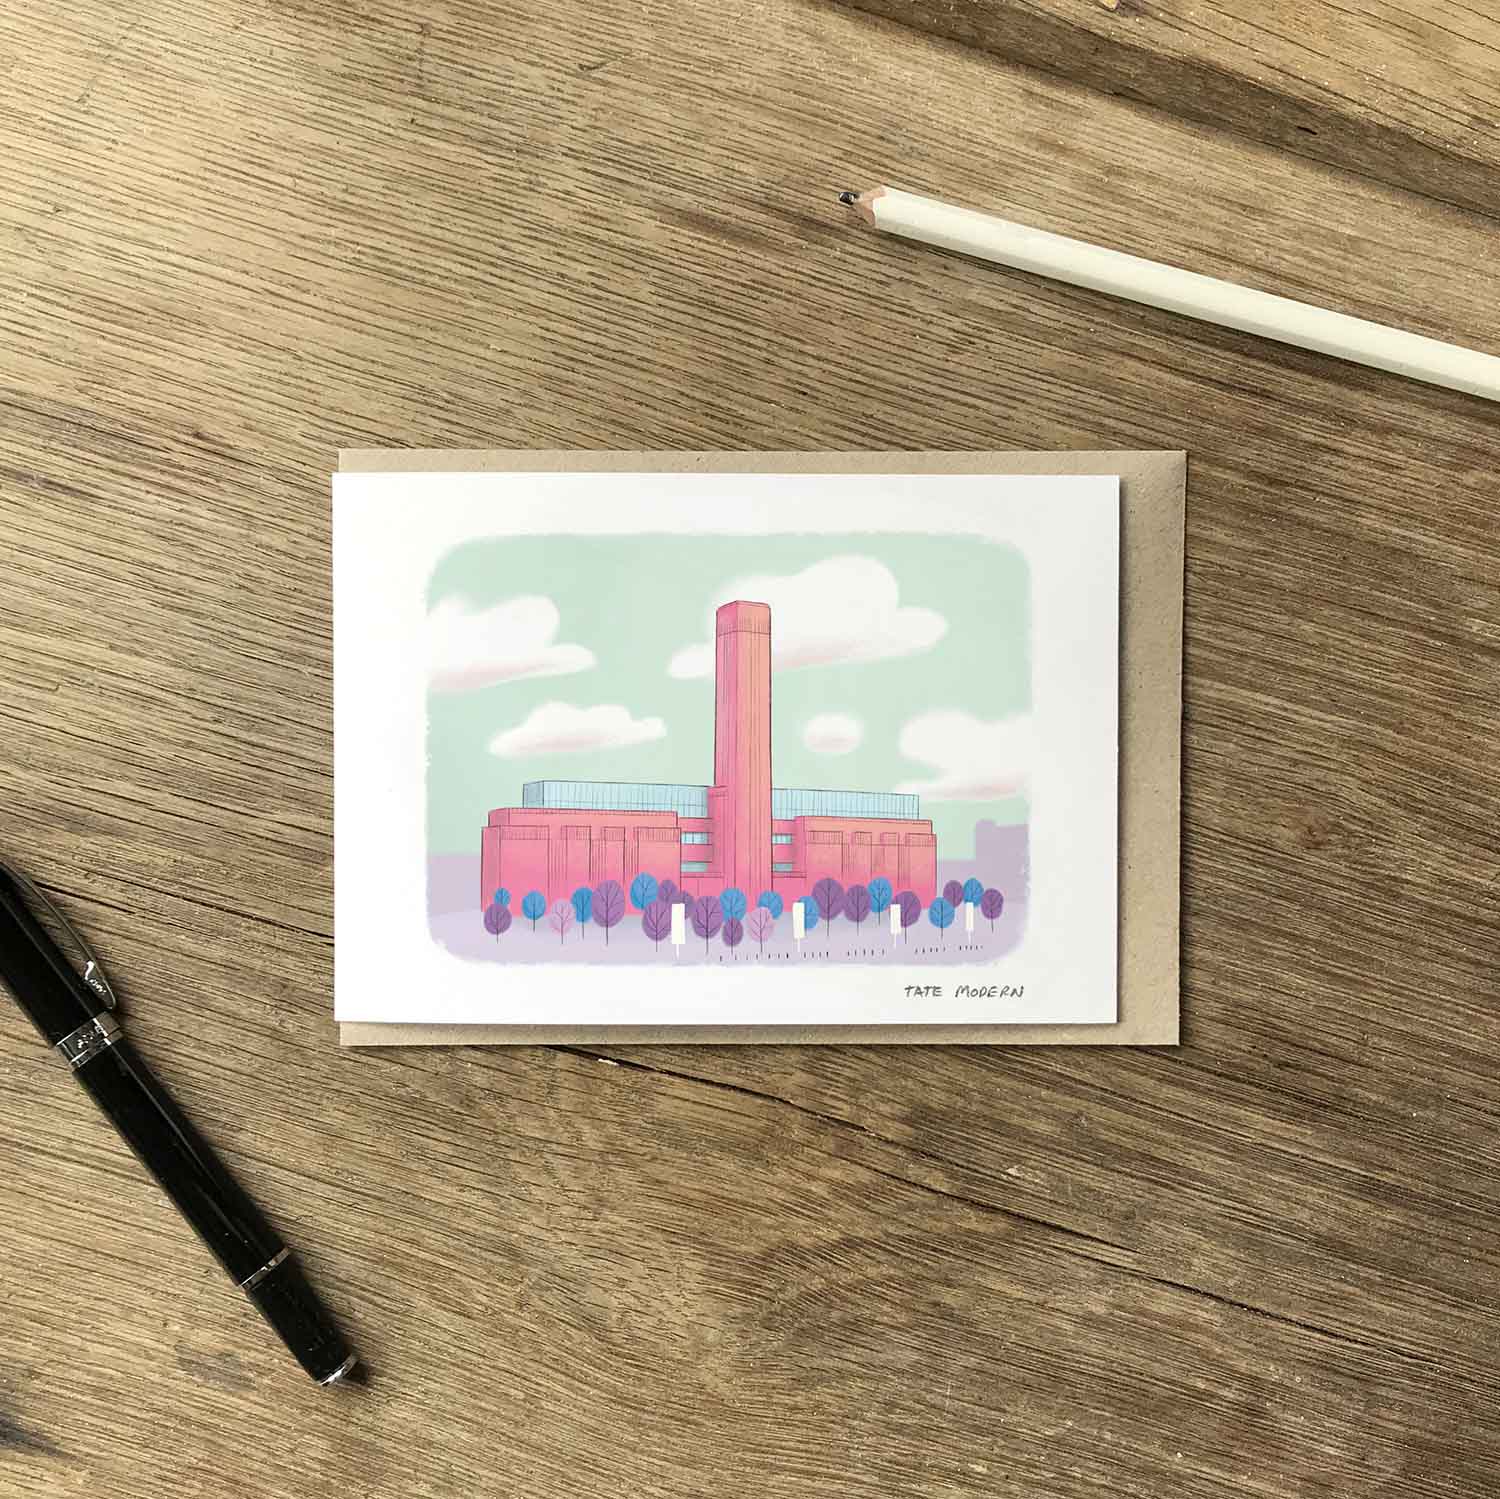 London's Tate Modern beautifully illustrated on a greeting card by mike green illustration.